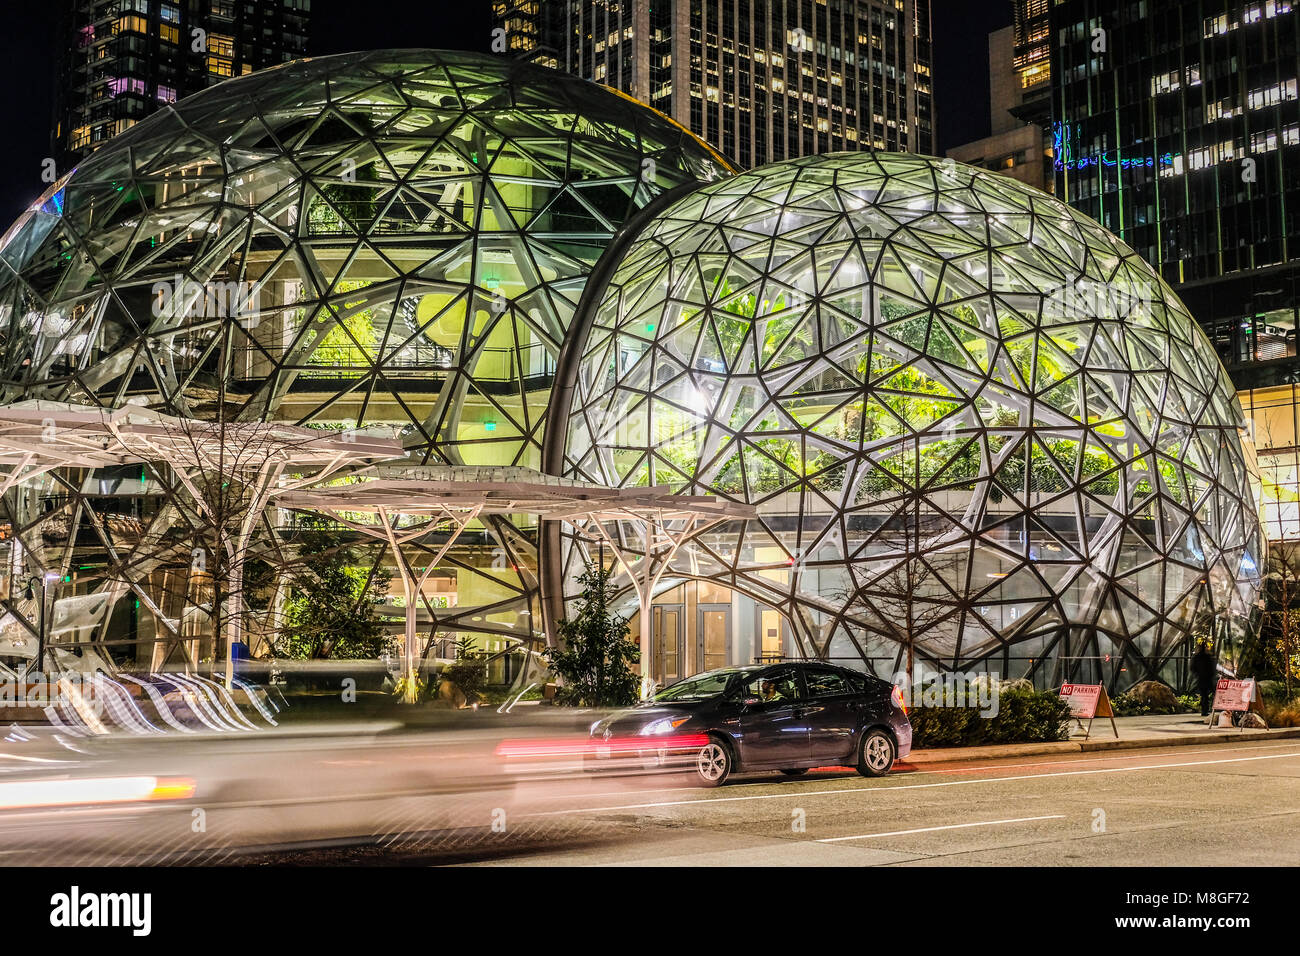 The glass dome Spheres at Amazon headquarter at night in downtown Seattle  Stock Photo - Alamy